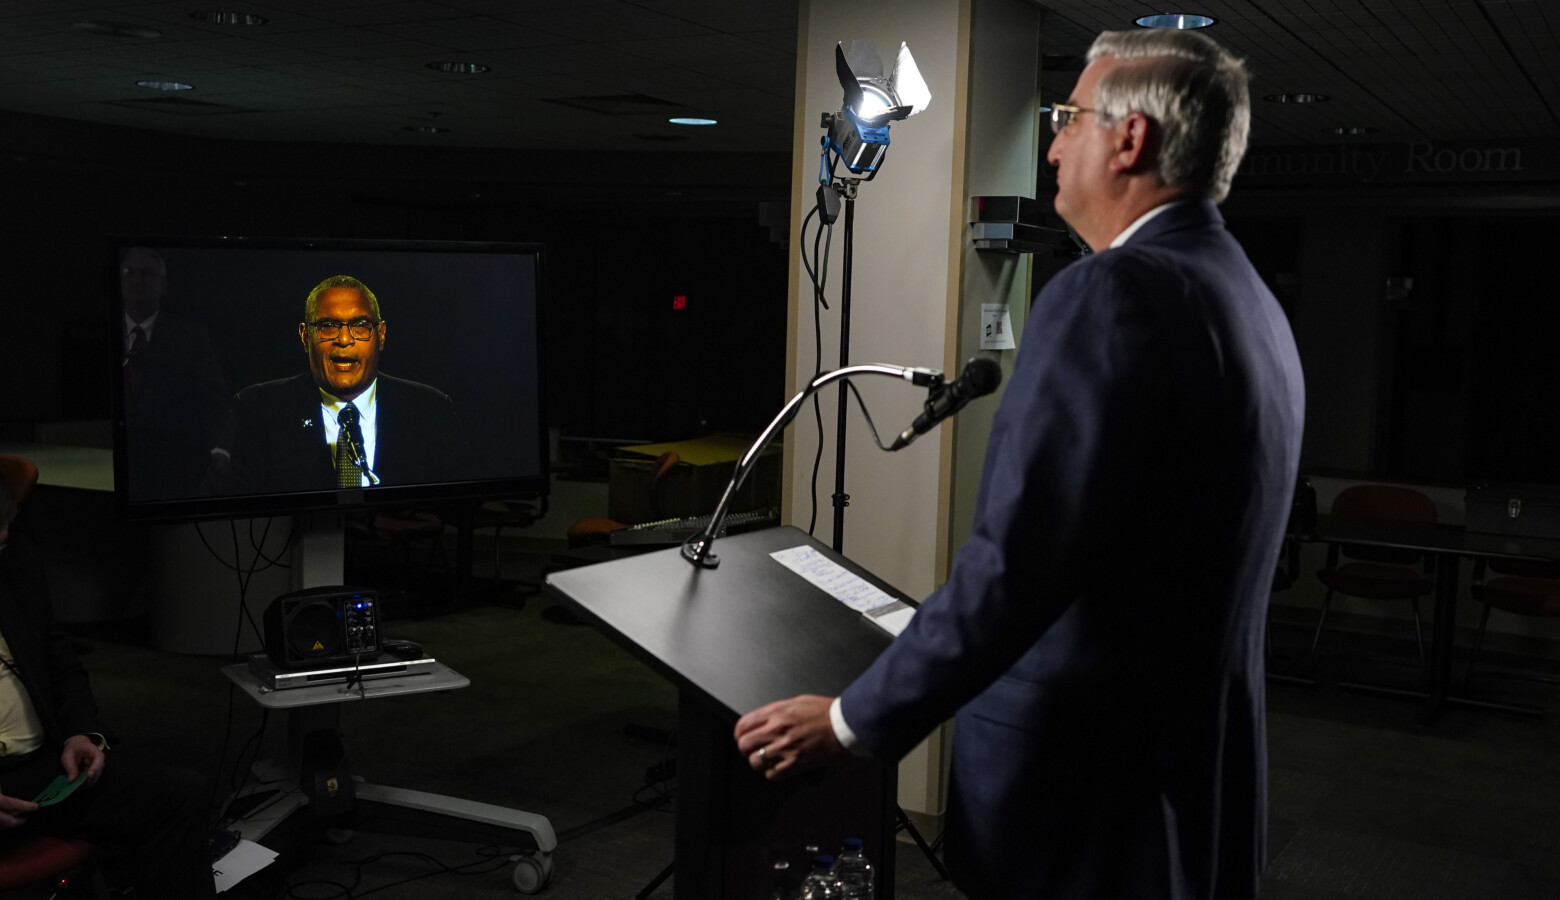 Due to COVID-19 precautions, the three gubernatorial candidates and the moderator were in separate rooms at WFYI studios in Indianapolis. Here, Republican Gov. Eric Holcomb watches Democrat Dr. Woody Myers speak. (Darron Cummings/Associated Press)